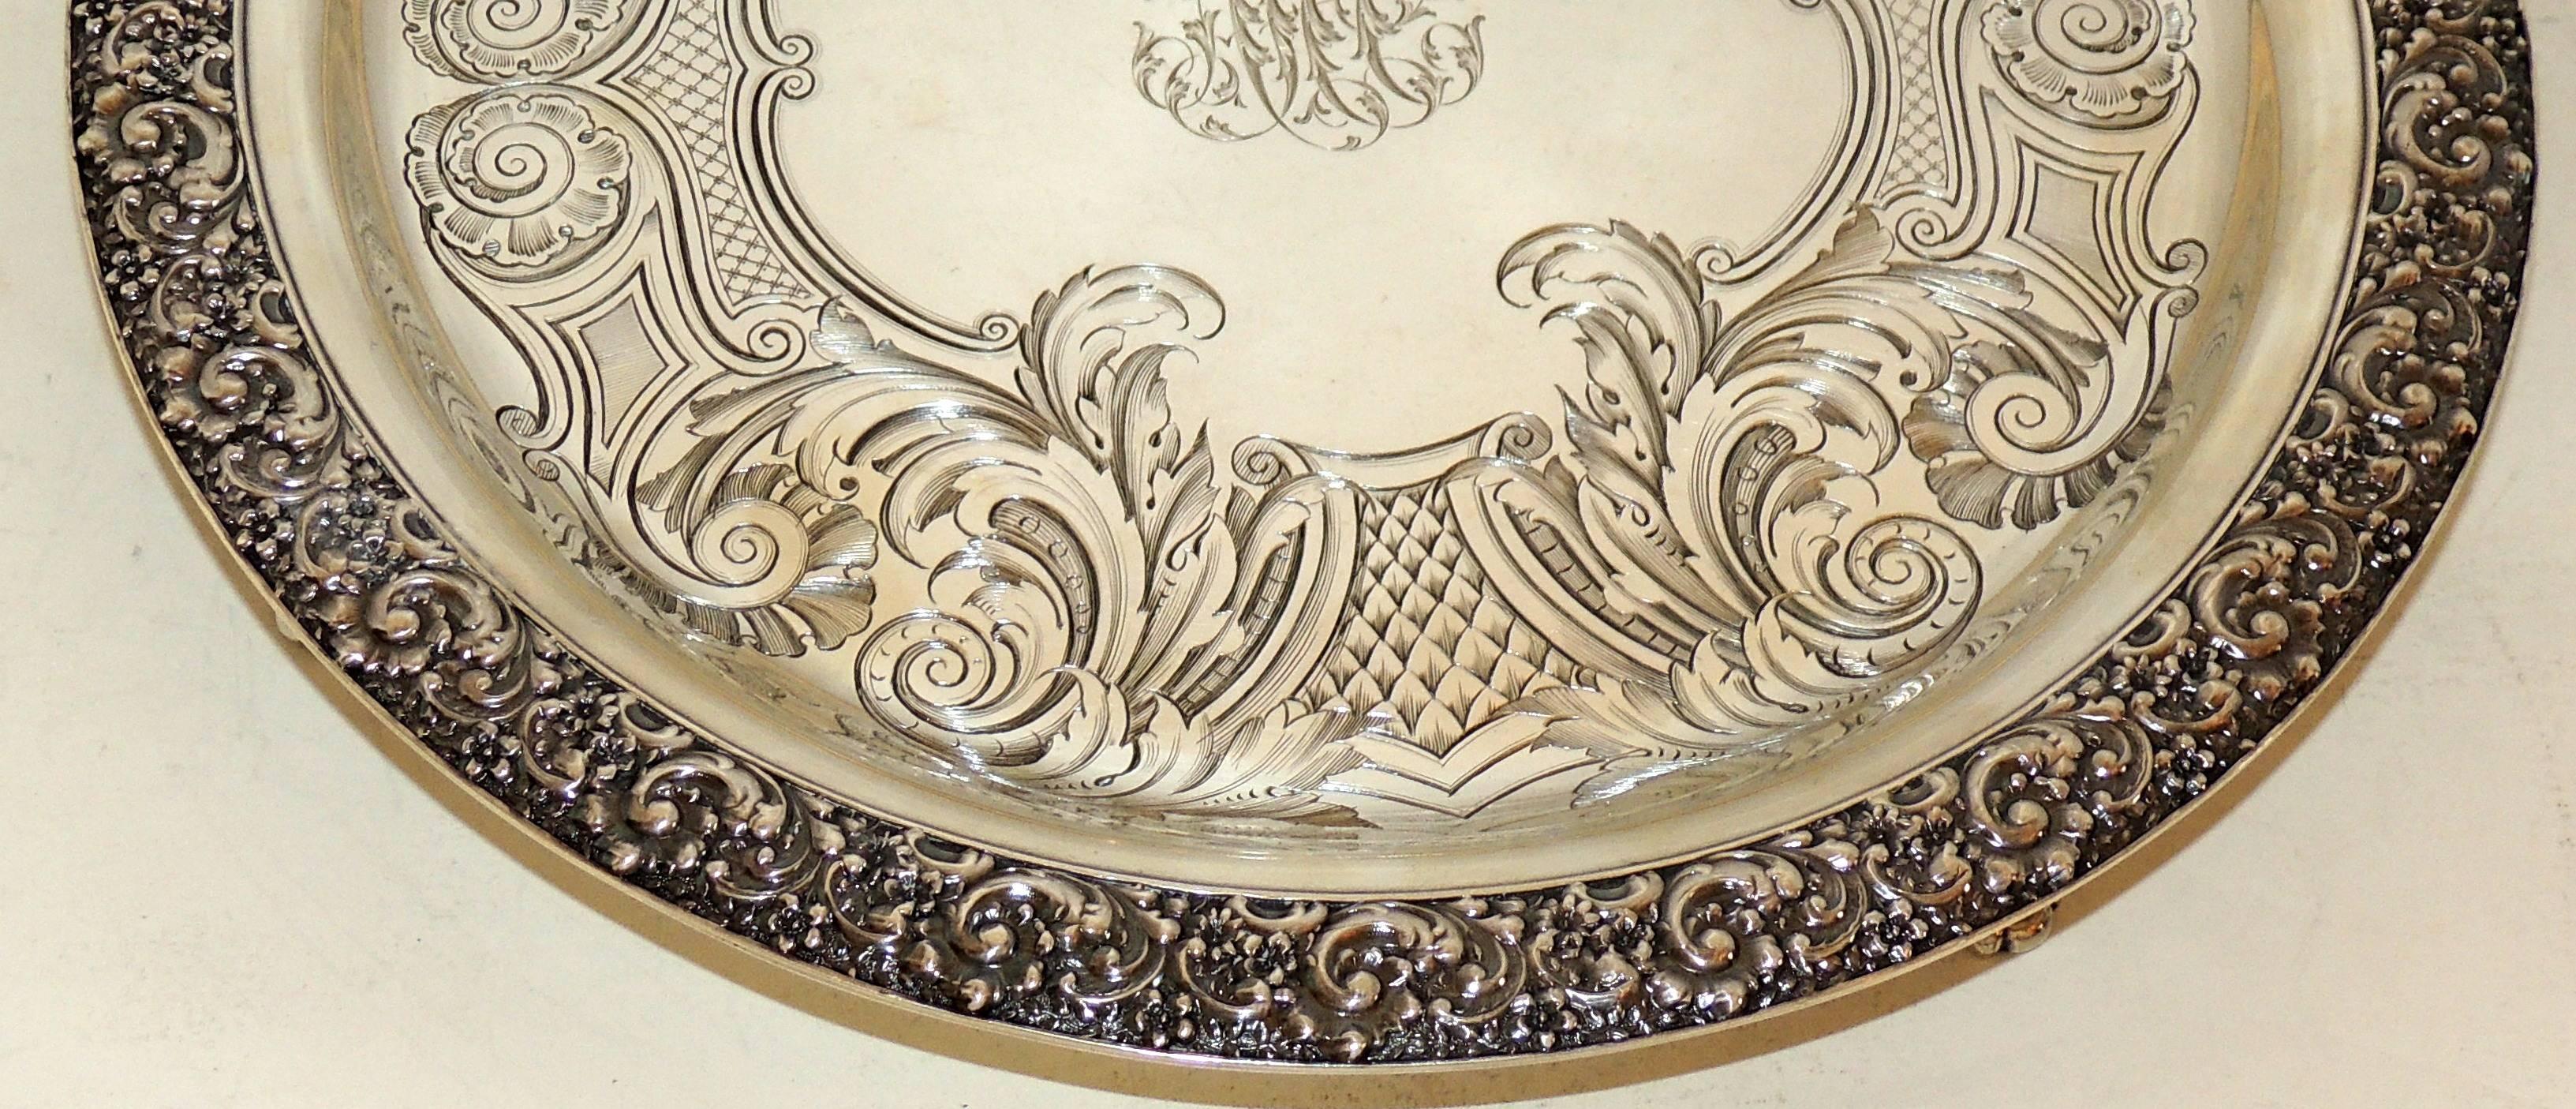 A wonderful Tiffany sterling silver finely engraved round and footed serving tray or platter centerpiece.